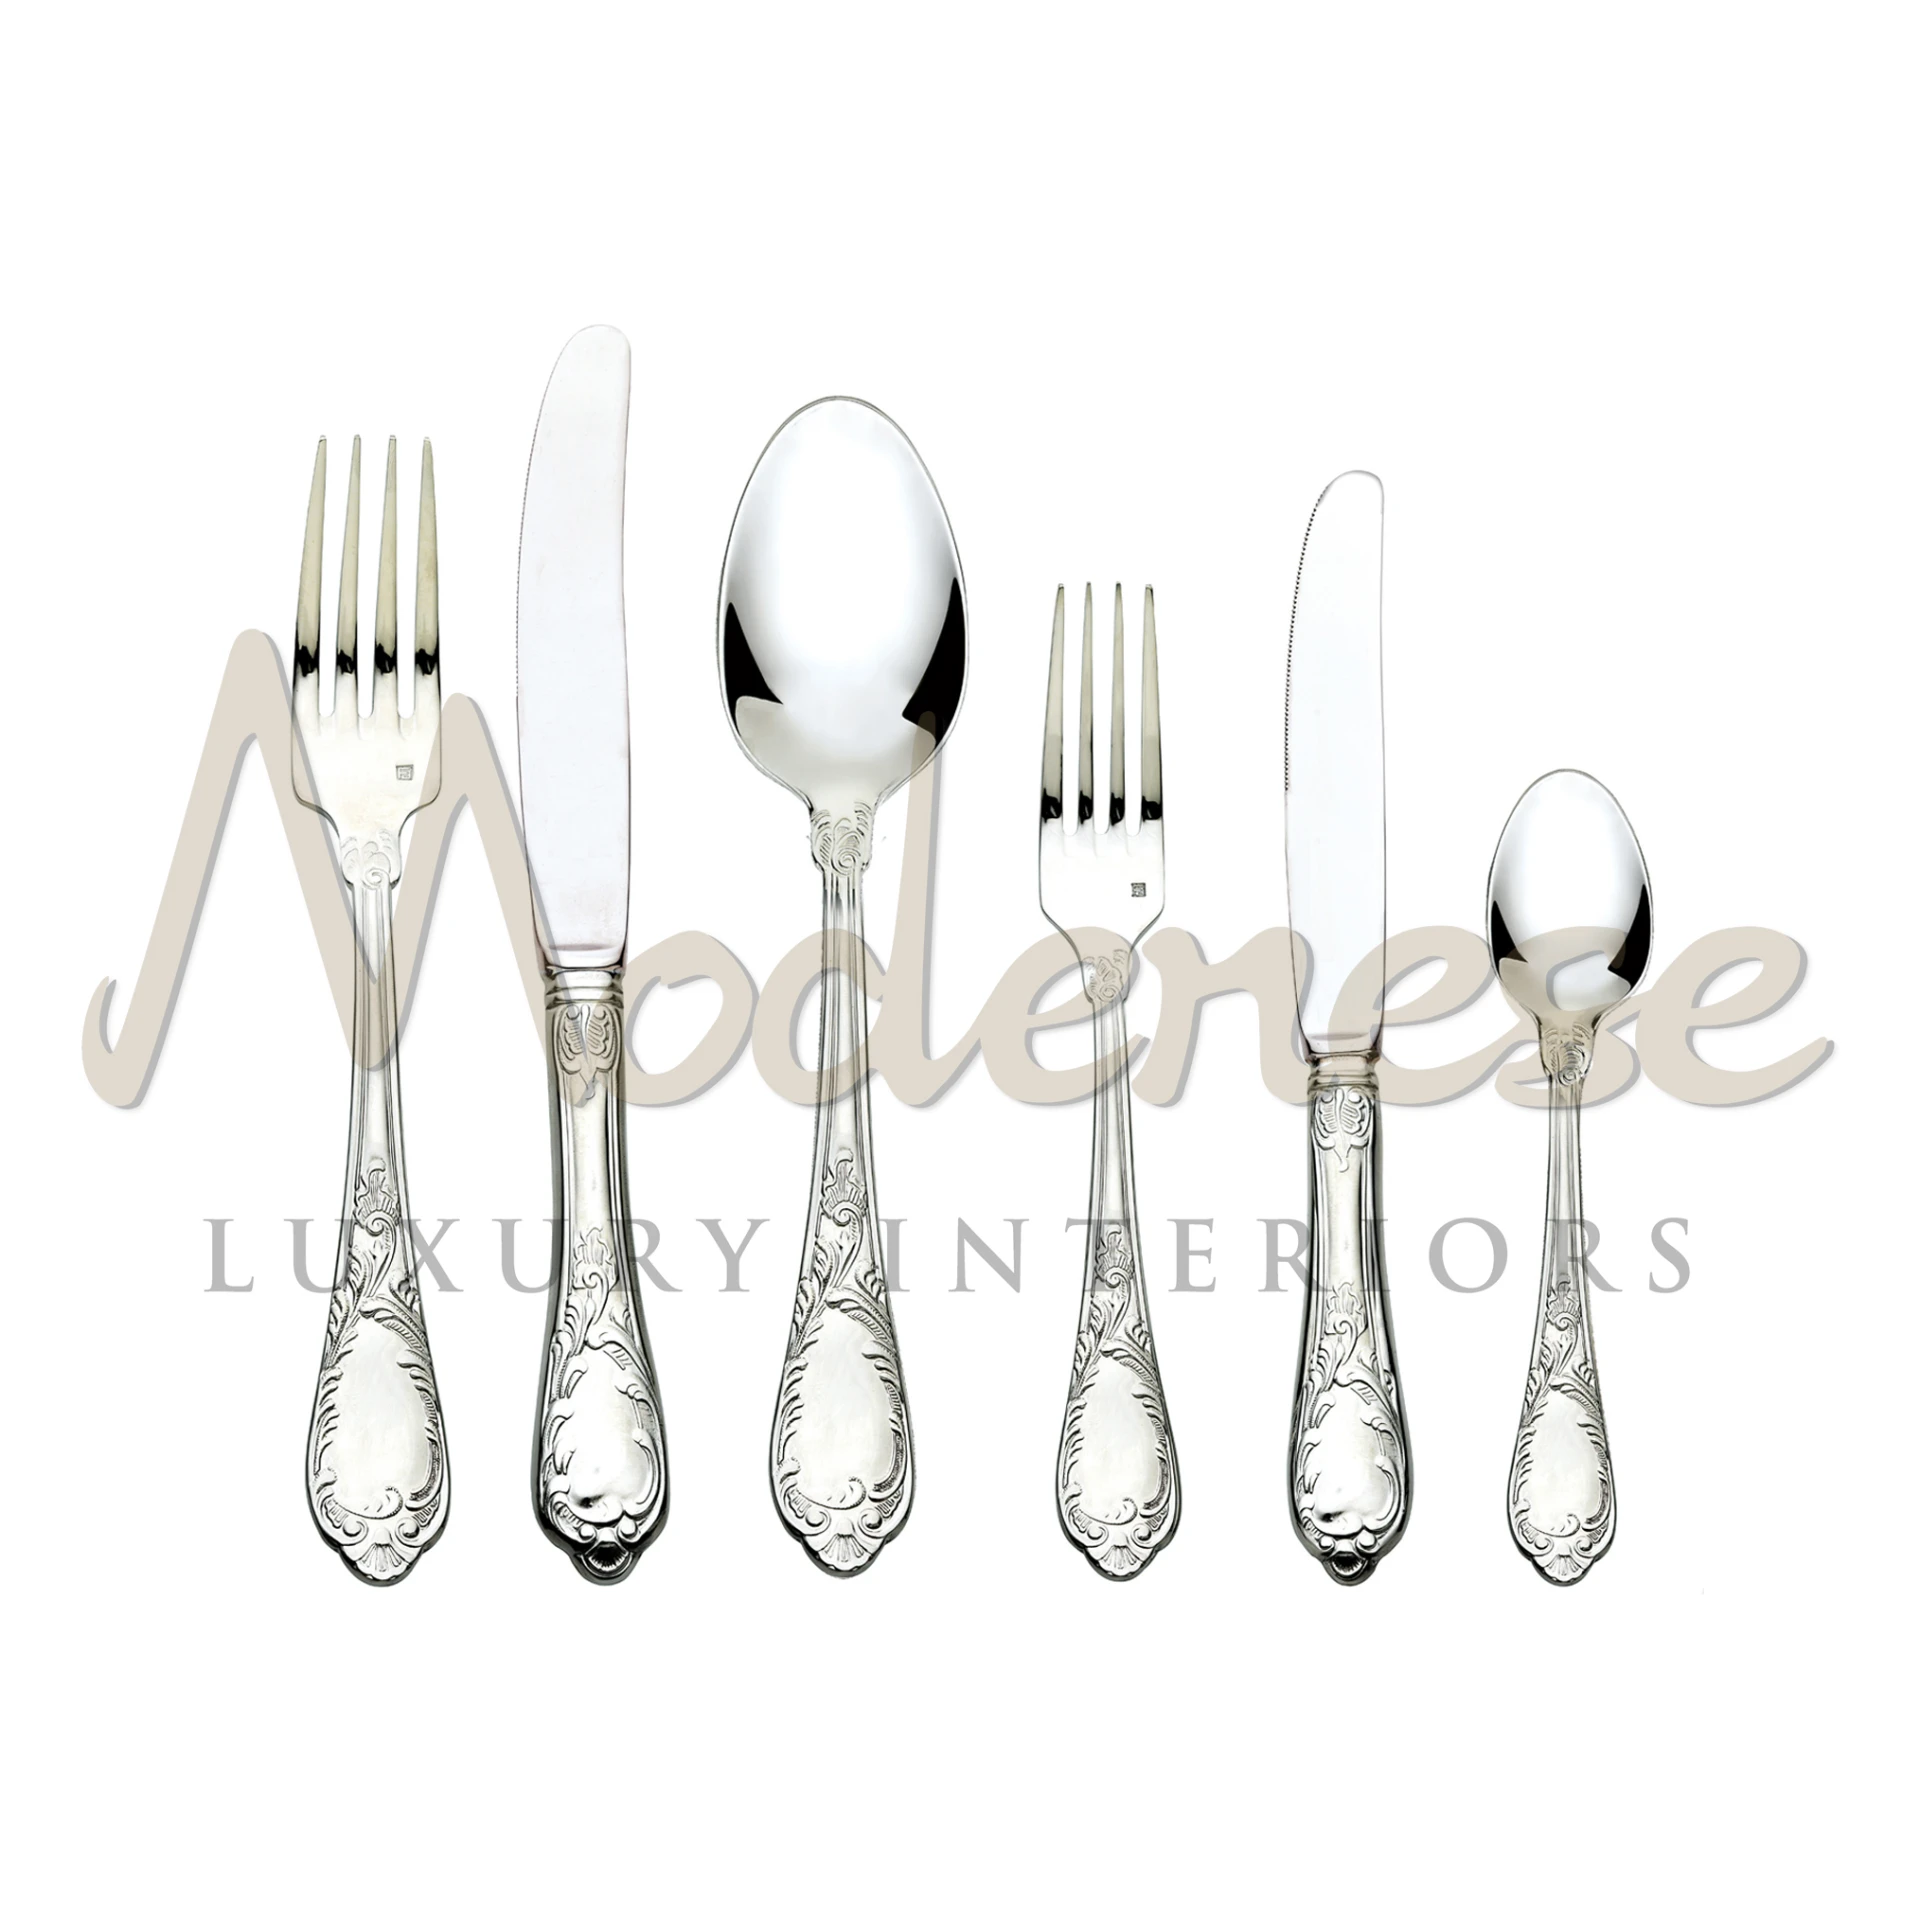 A pristine Inox cutlery set, featuring intricate floral designs on the handles, displayed against a white background.